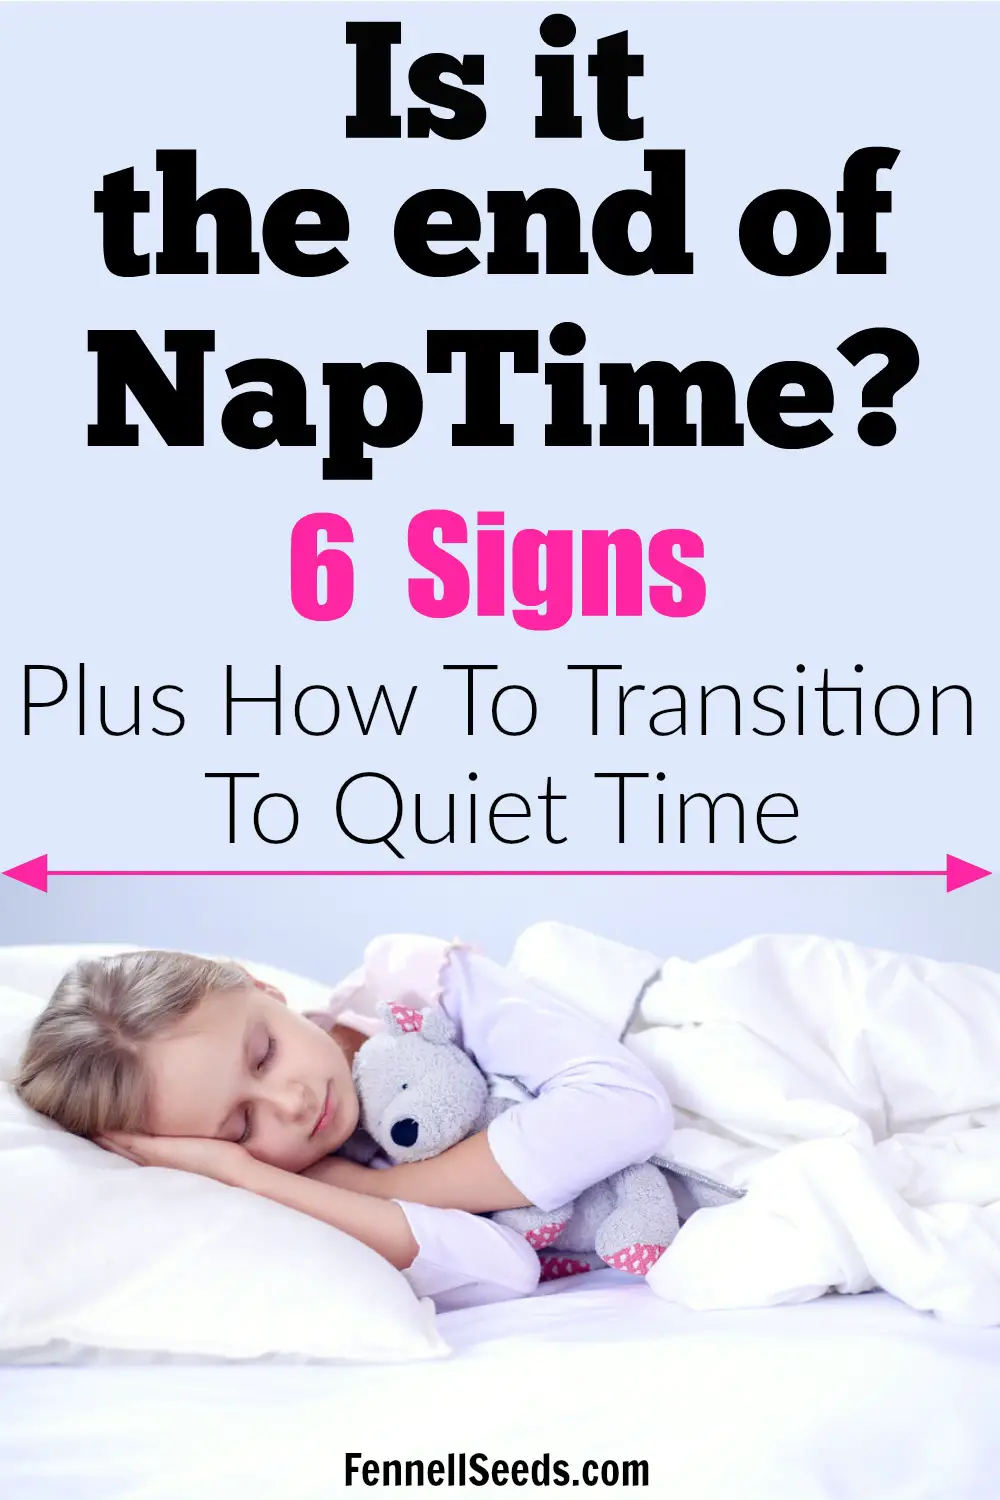 When do kids stop napping? 6 signs plus tips to transition to quiet time. | when does naptime end | no more nap | nap tips | quiet time